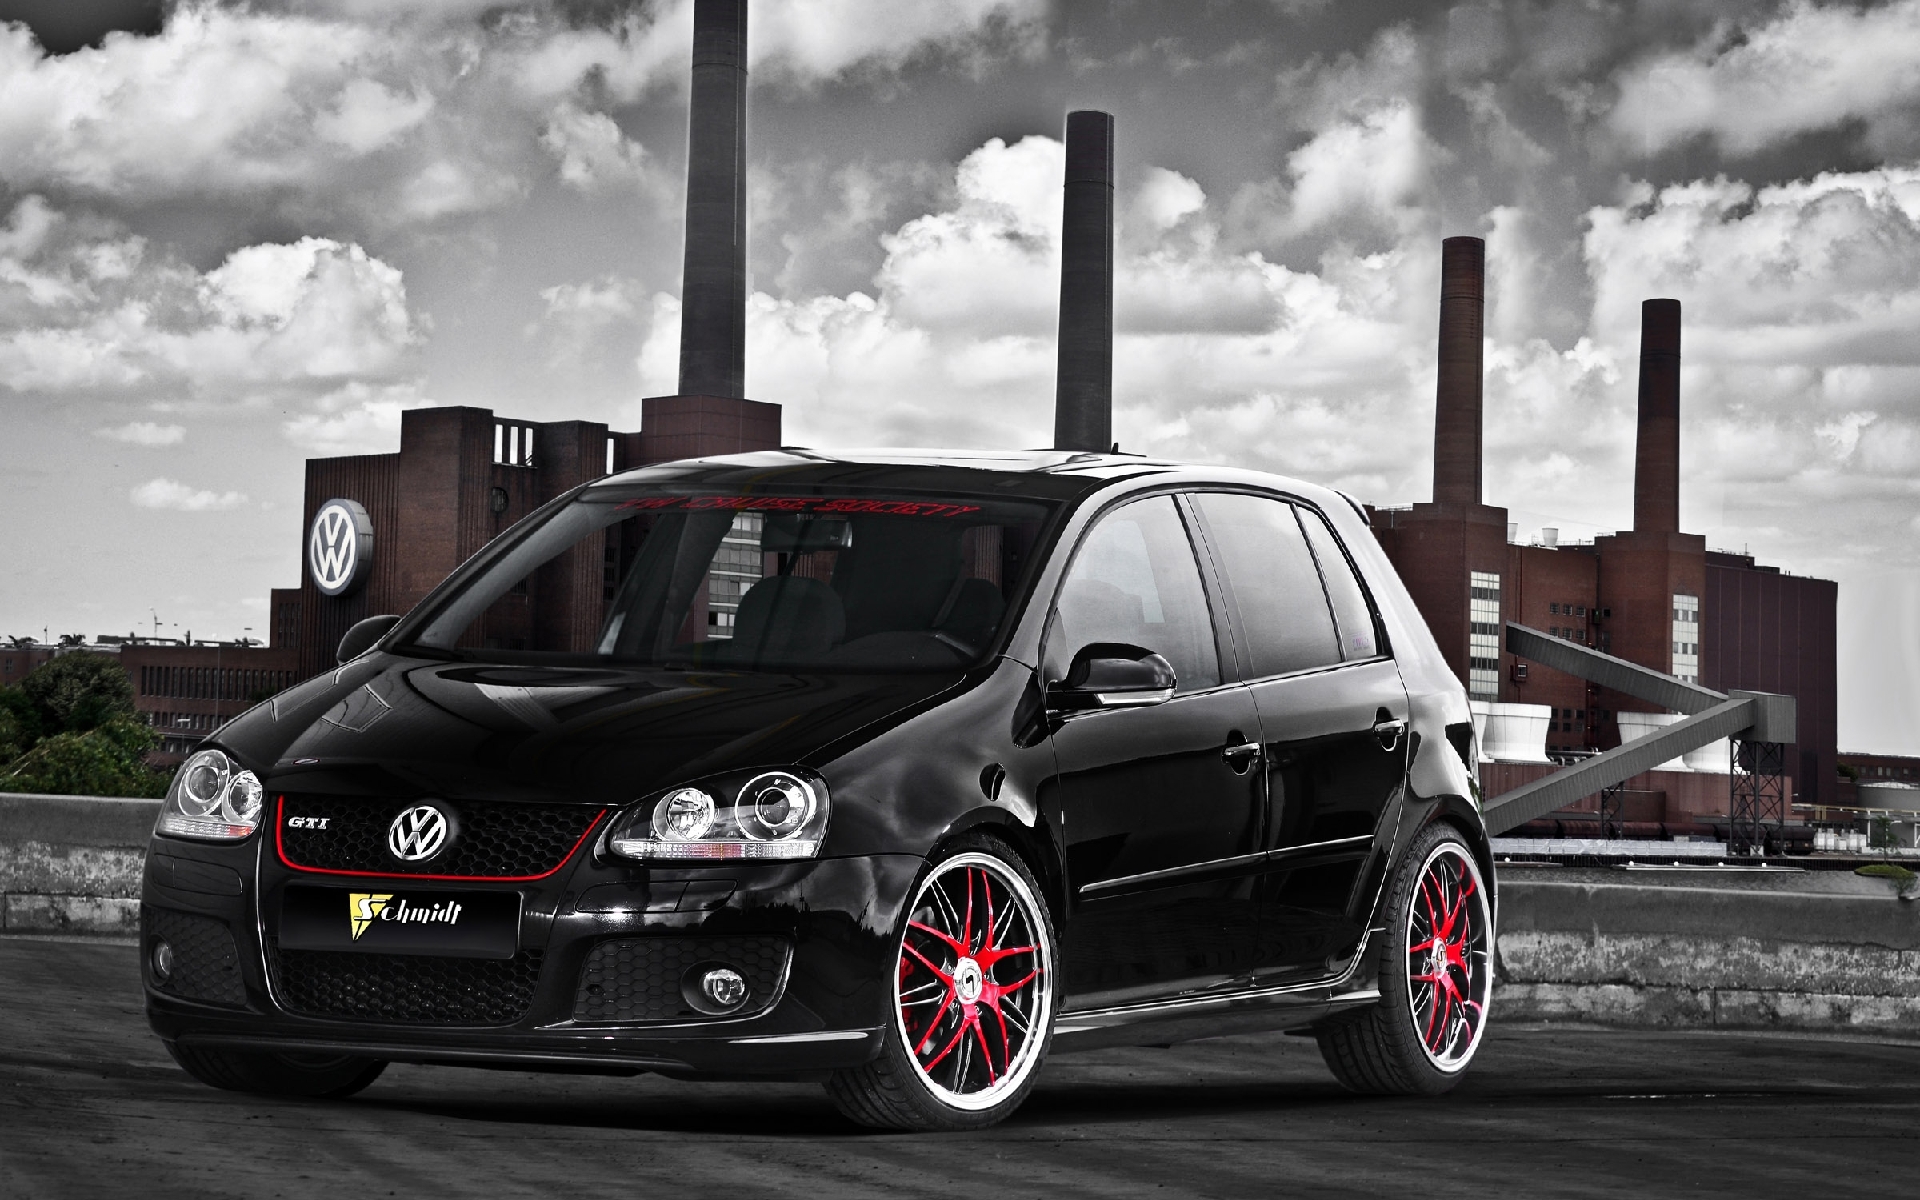 49763 3840x1080 PC pictures for free, download volkswagen, transport, auto 3840x1080 wallpapers on your desktop